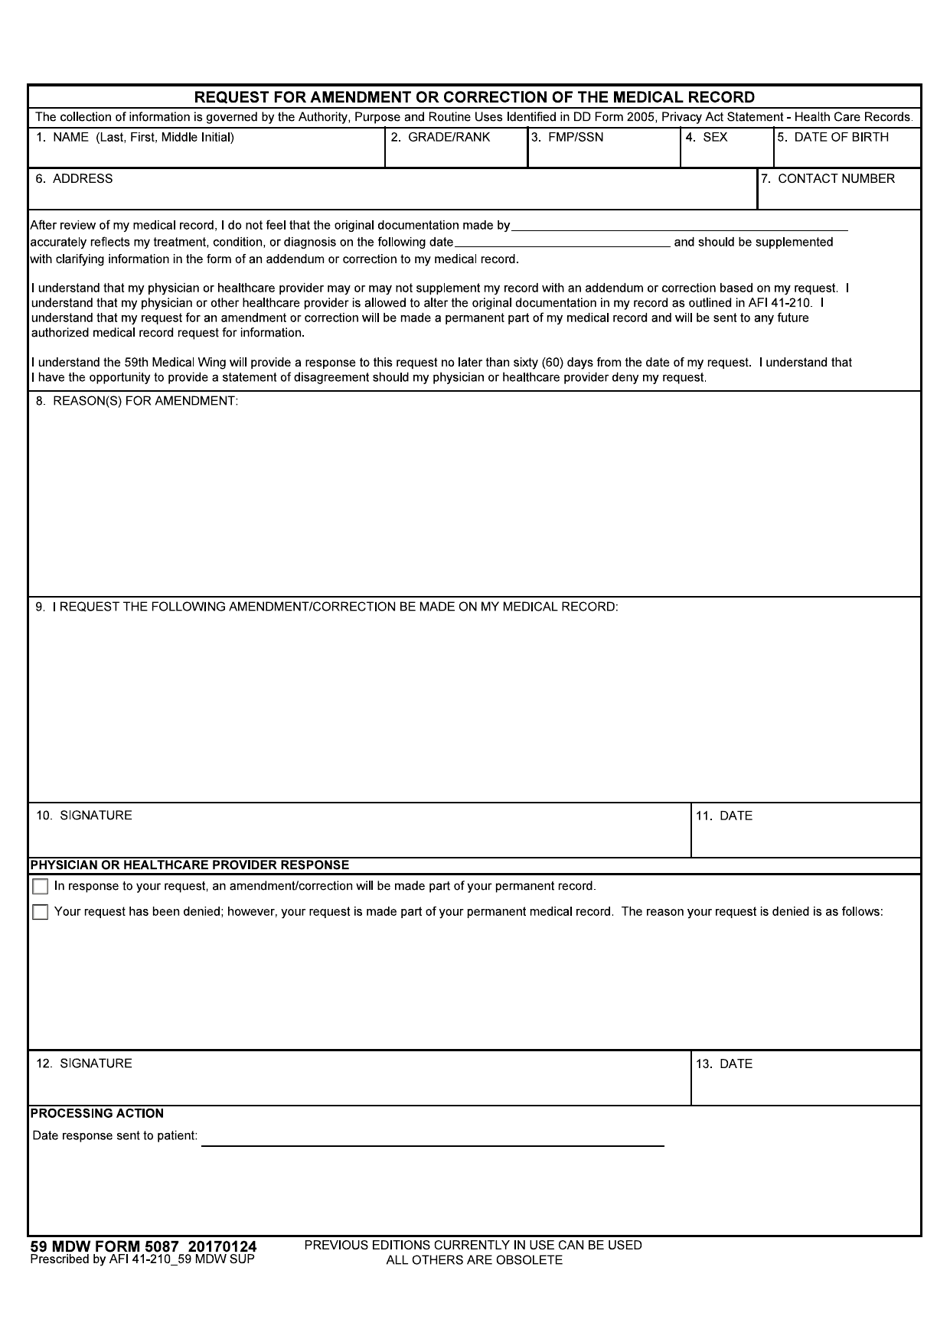 59 MDW Form 5087 Request for Amendment or Correction of the Medical Record, Page 1